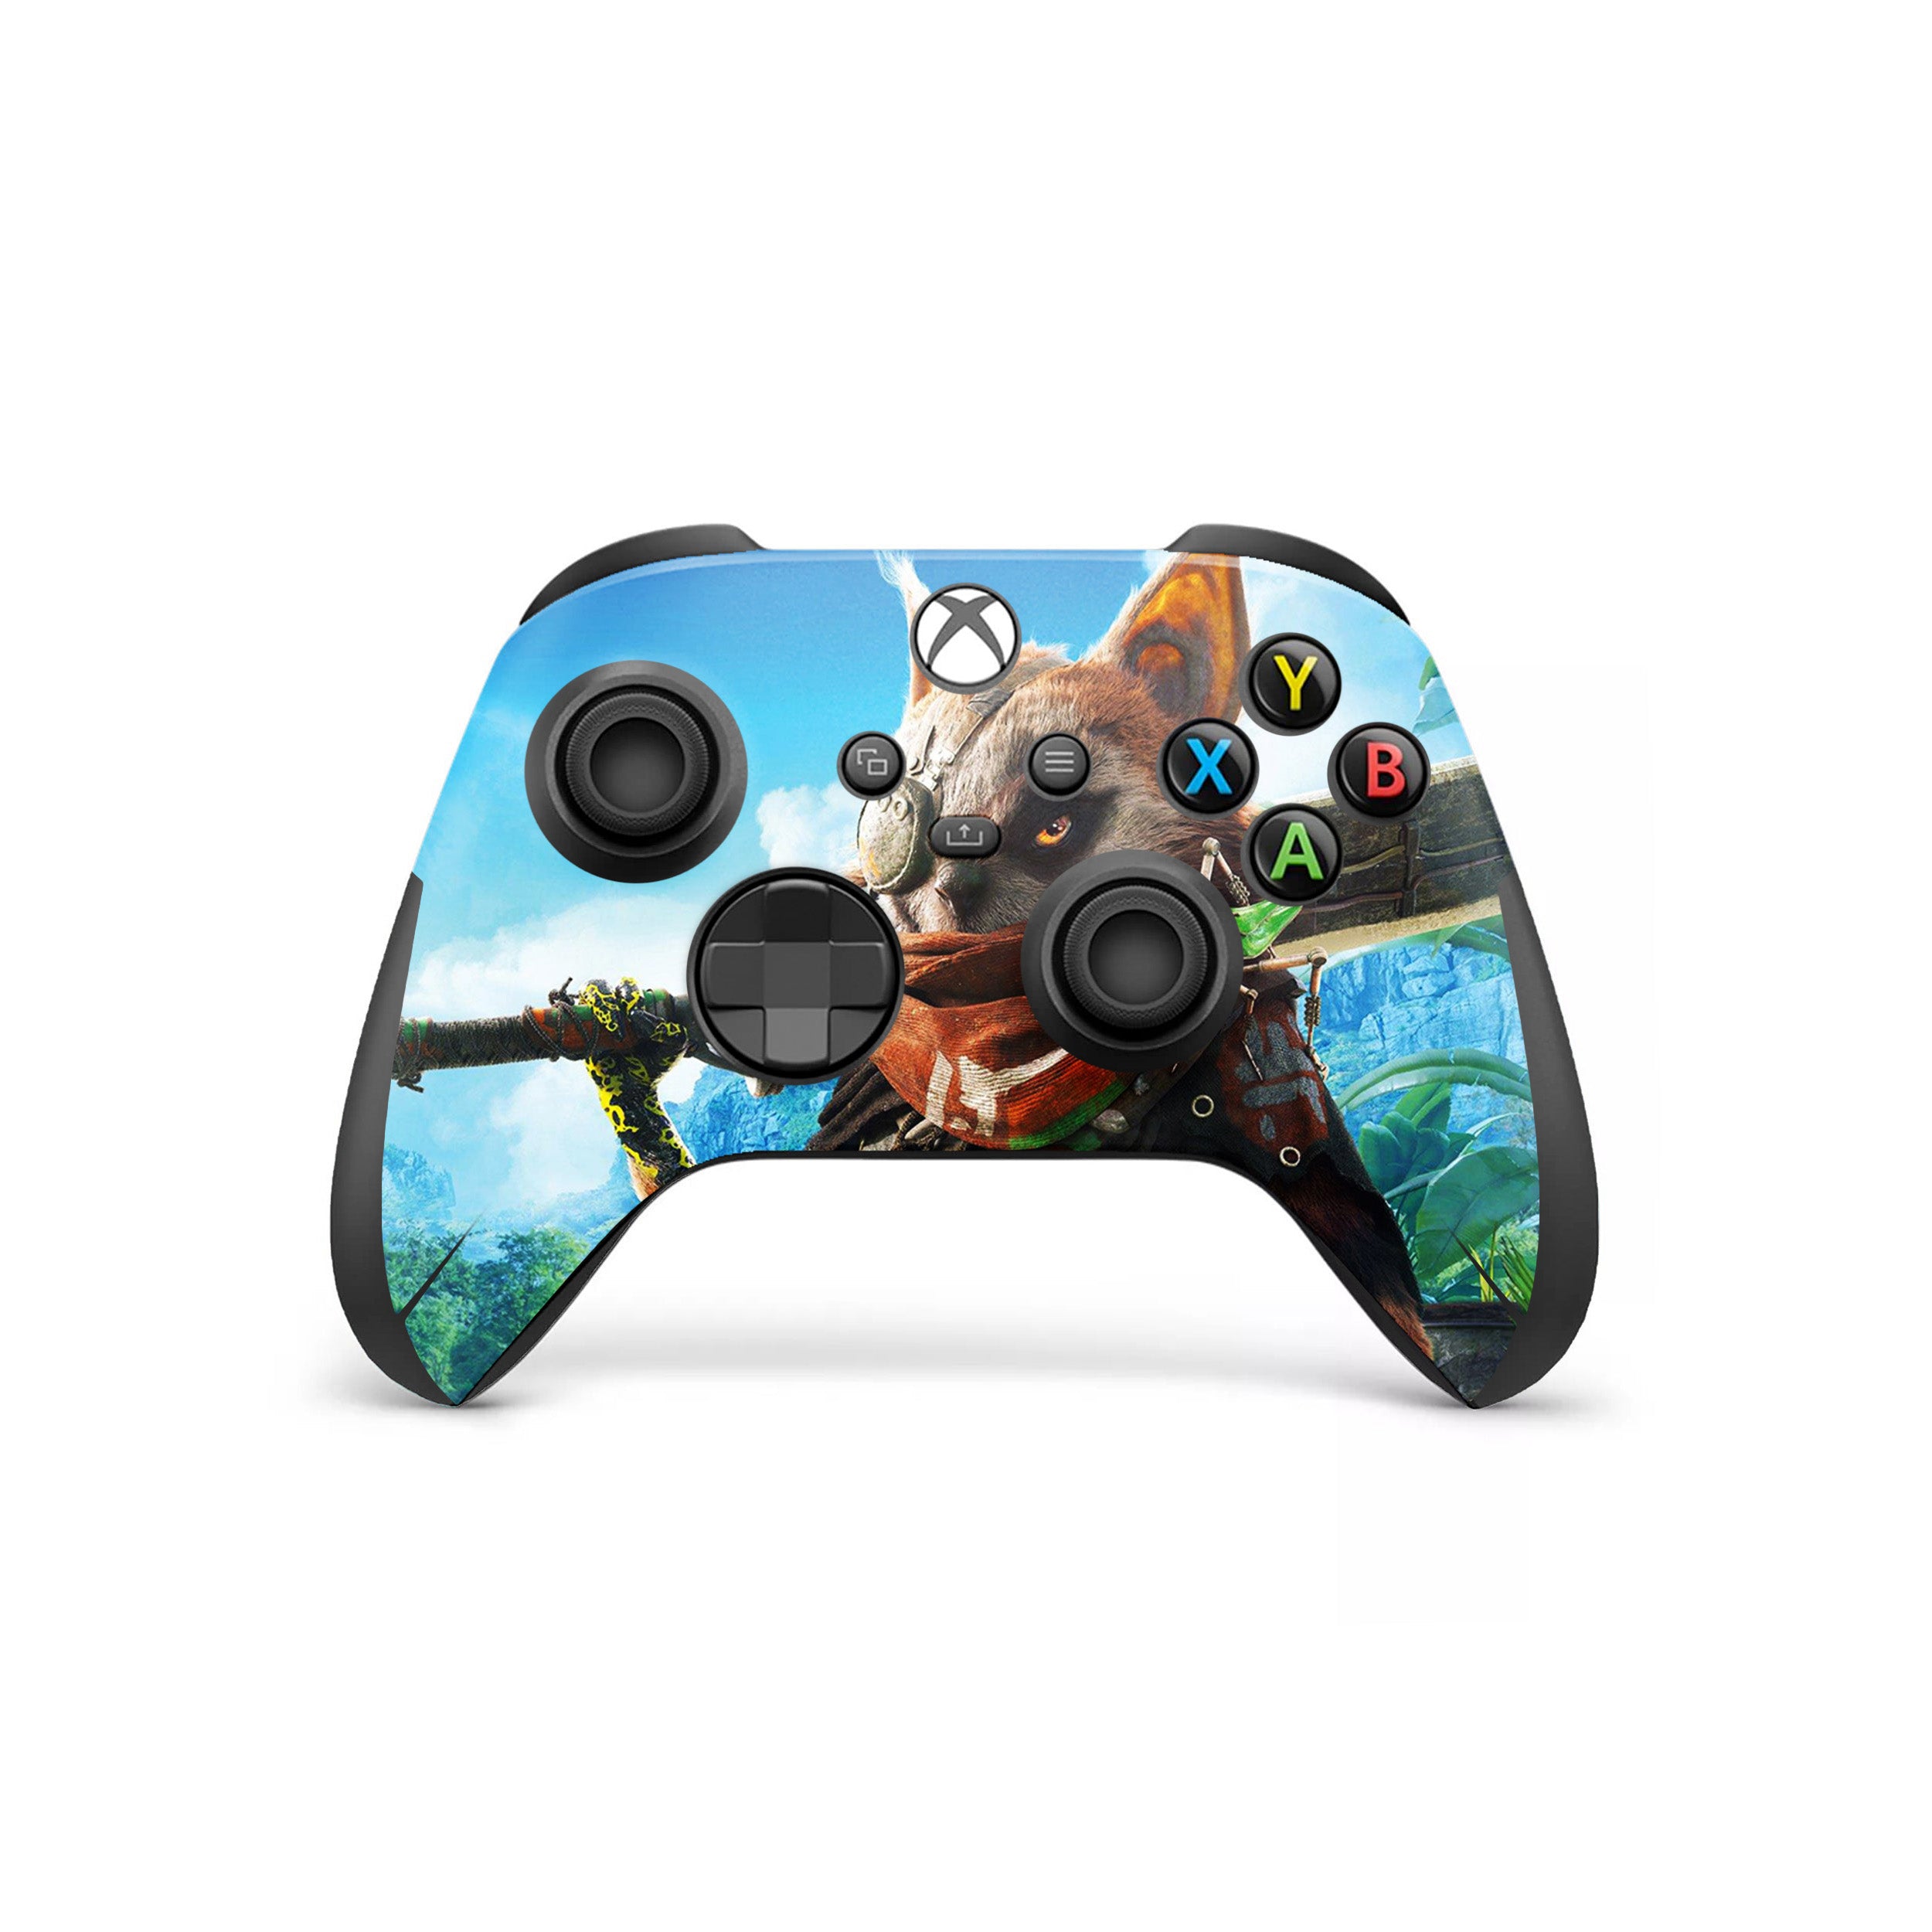 A video game skin featuring a Biomutant design for the Xbox Wireless Controller.